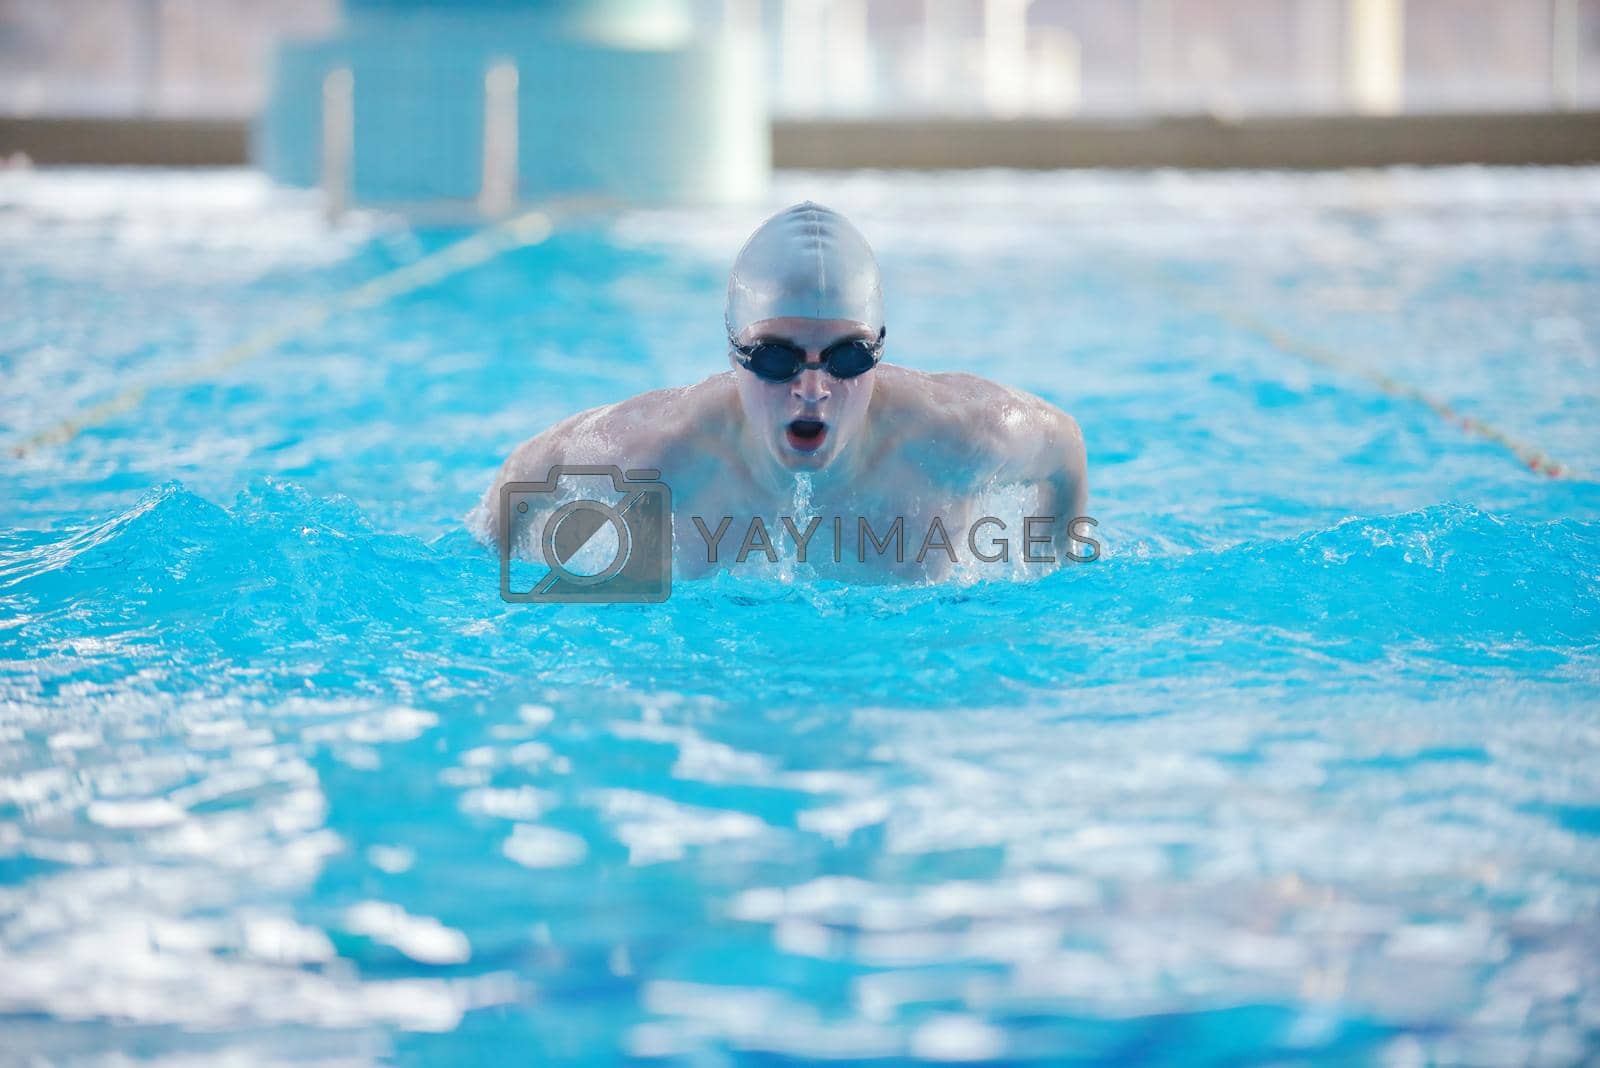 Royalty free image of swimmer by dotshock